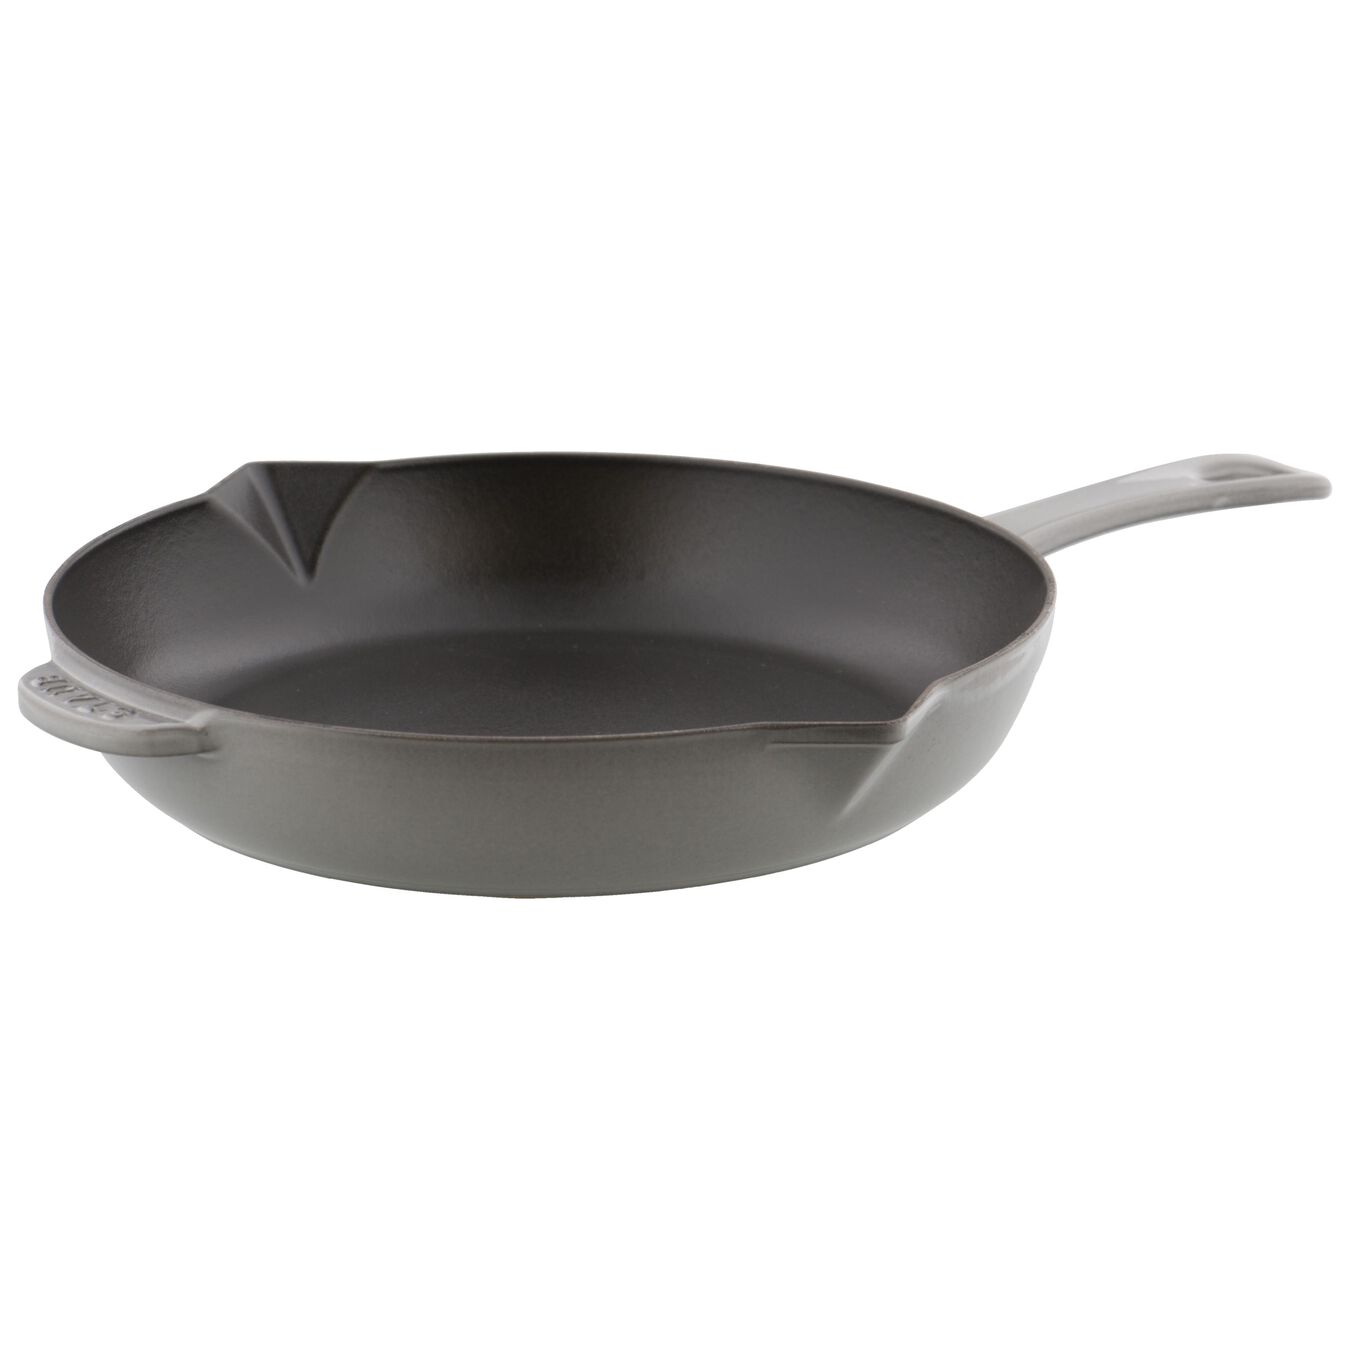 26 cm Cast iron Frying pan with pouring spout graphite-grey,,large 1